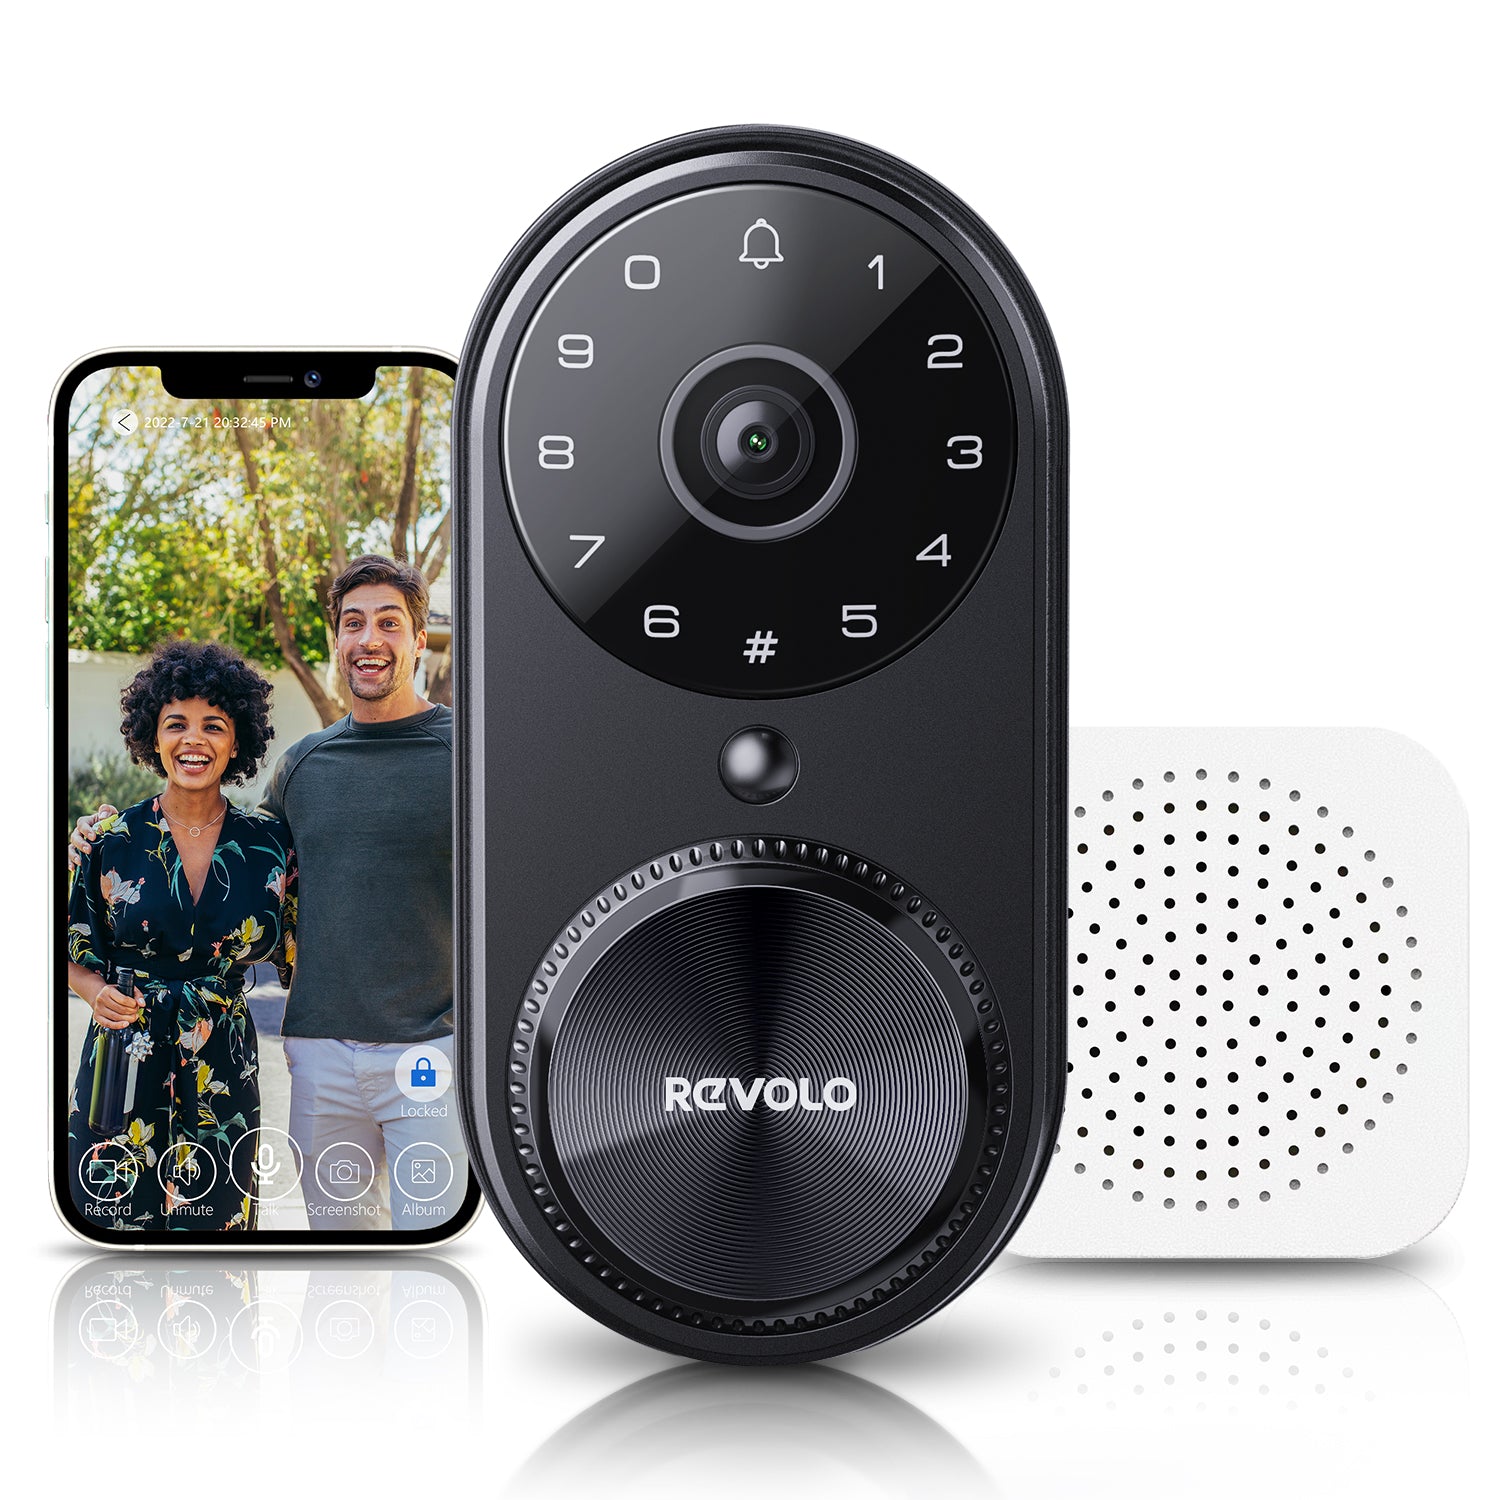 Revolo WFV01 Smart Lock with Camera, WiFi Smart Video Lock, Keyless Entry Door Lock, Doorbell Camera Wireless with Chime, Supports App Control, 1080P - 1